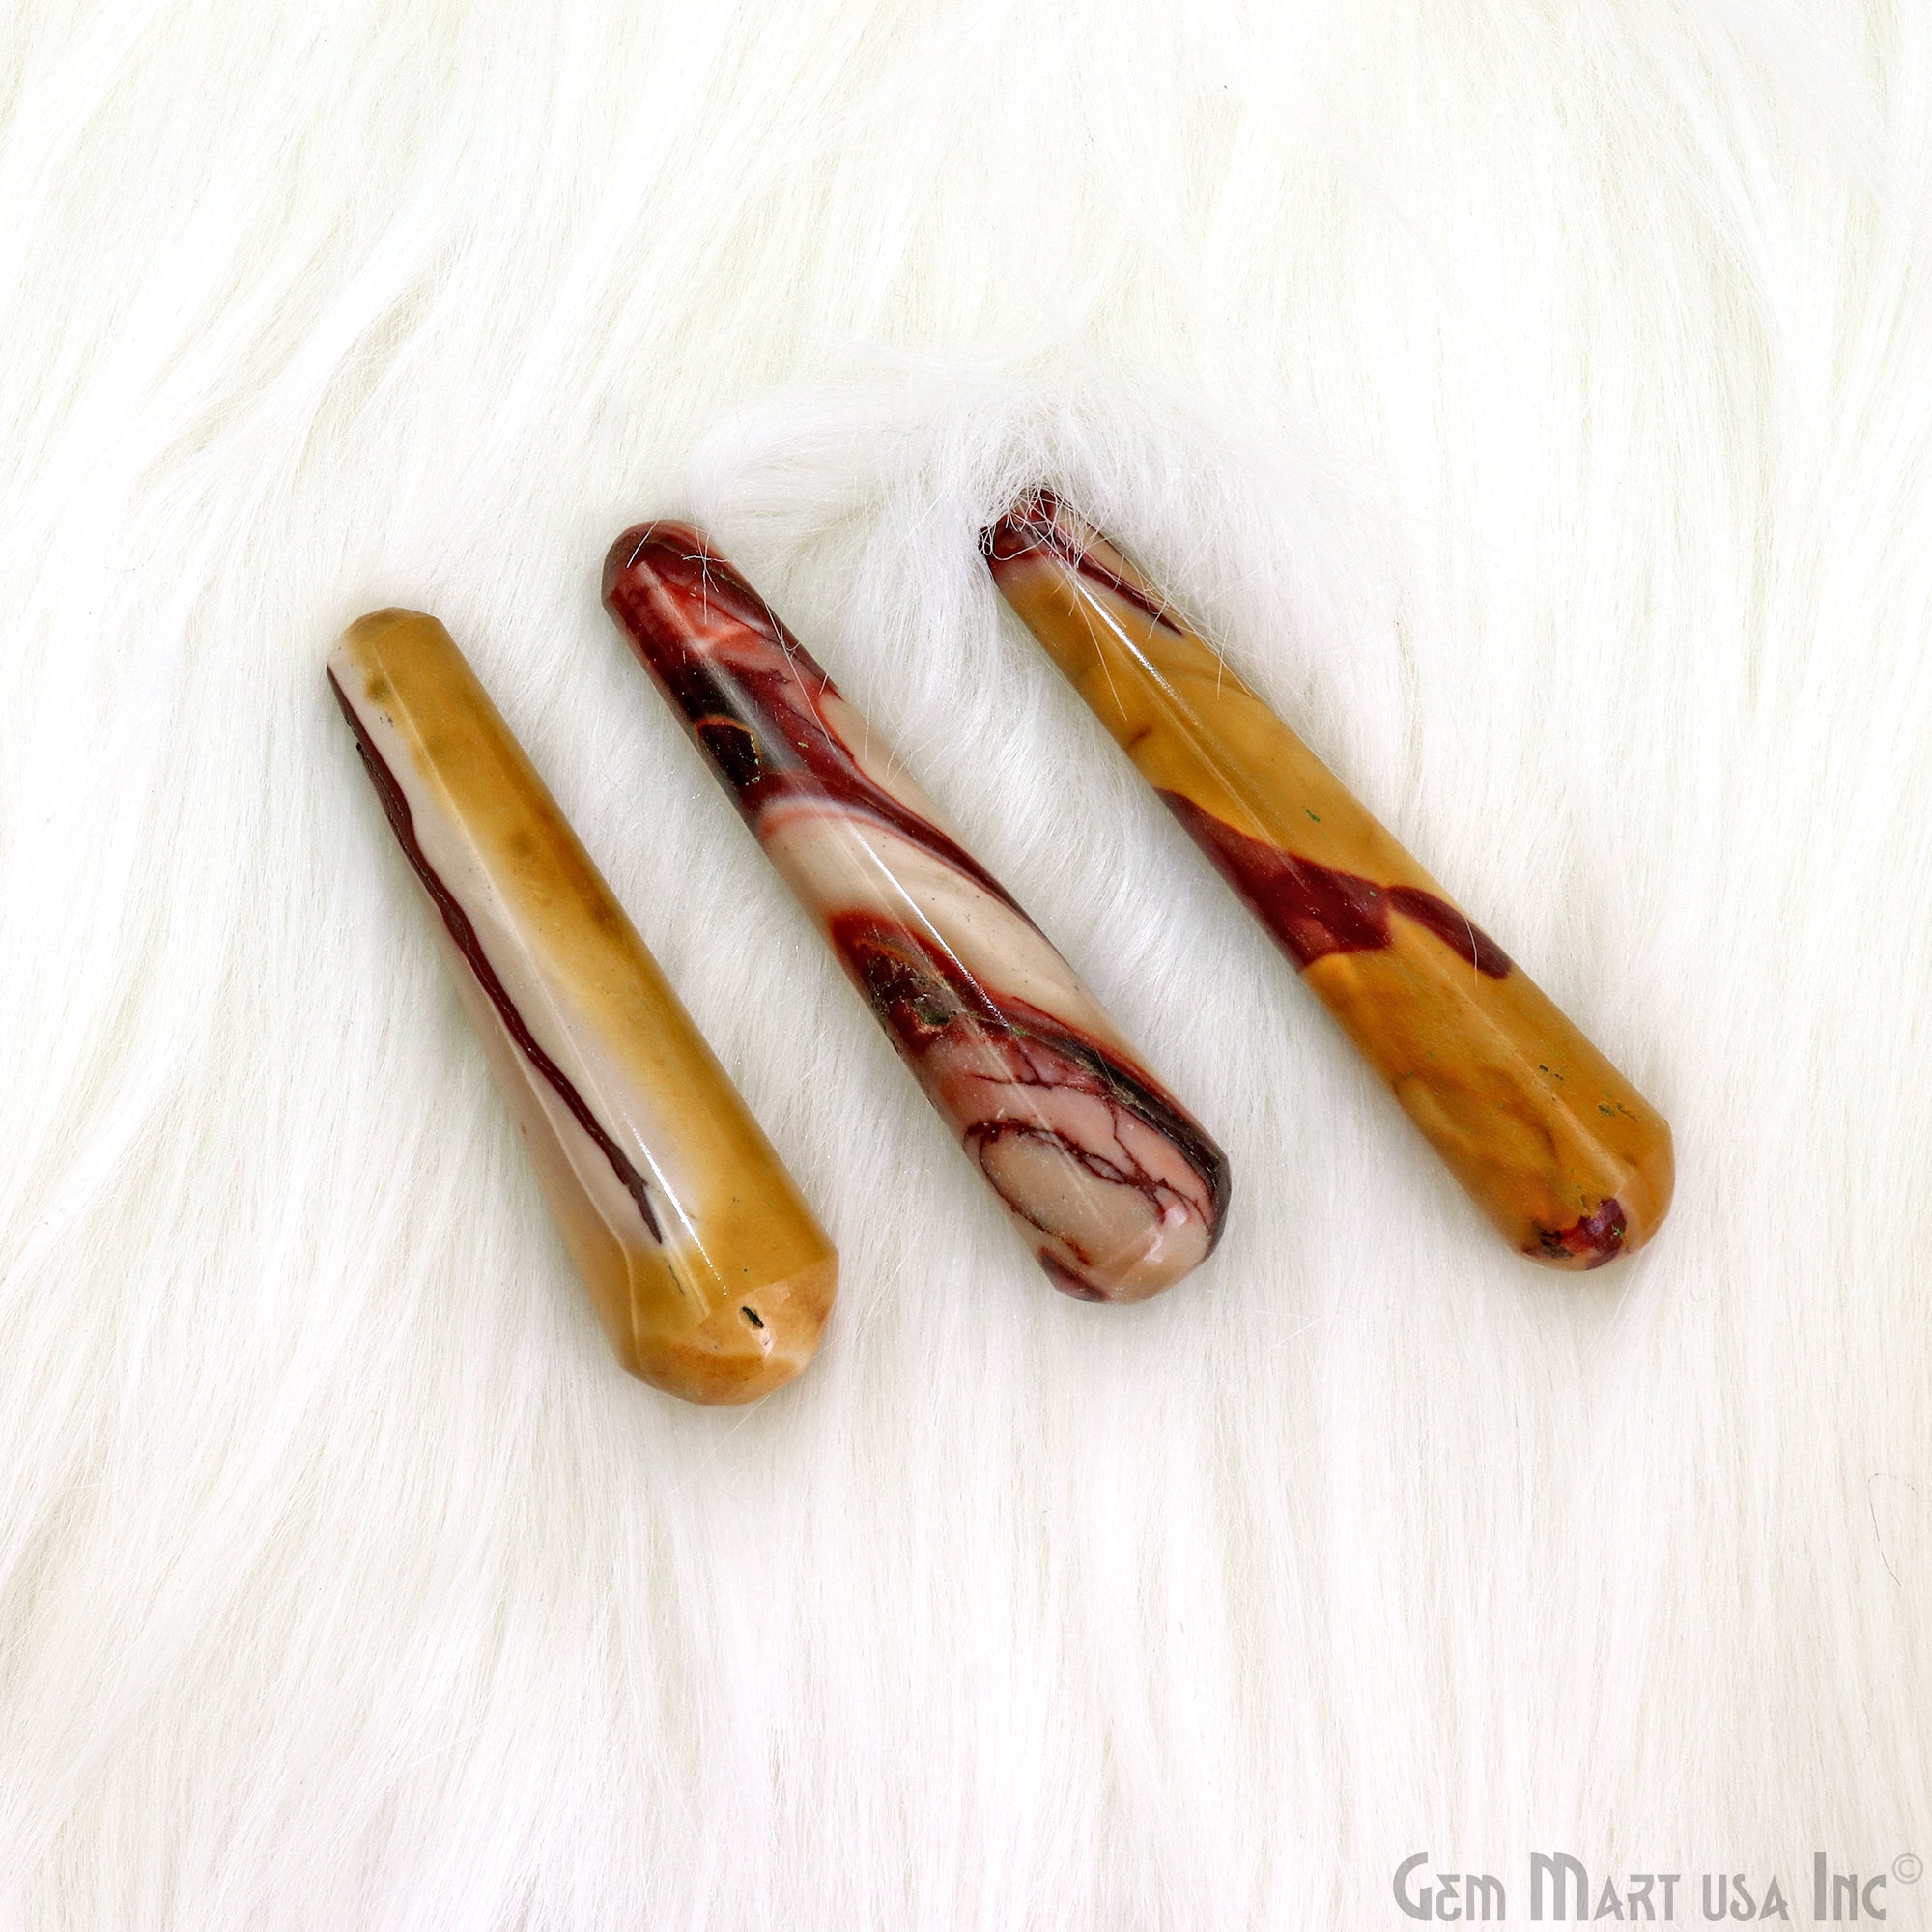 Mookaite Hand Made SPA Massage Wand Reiki Healing Crystal Relaxation Meditation Collection Gift 3-4Inch